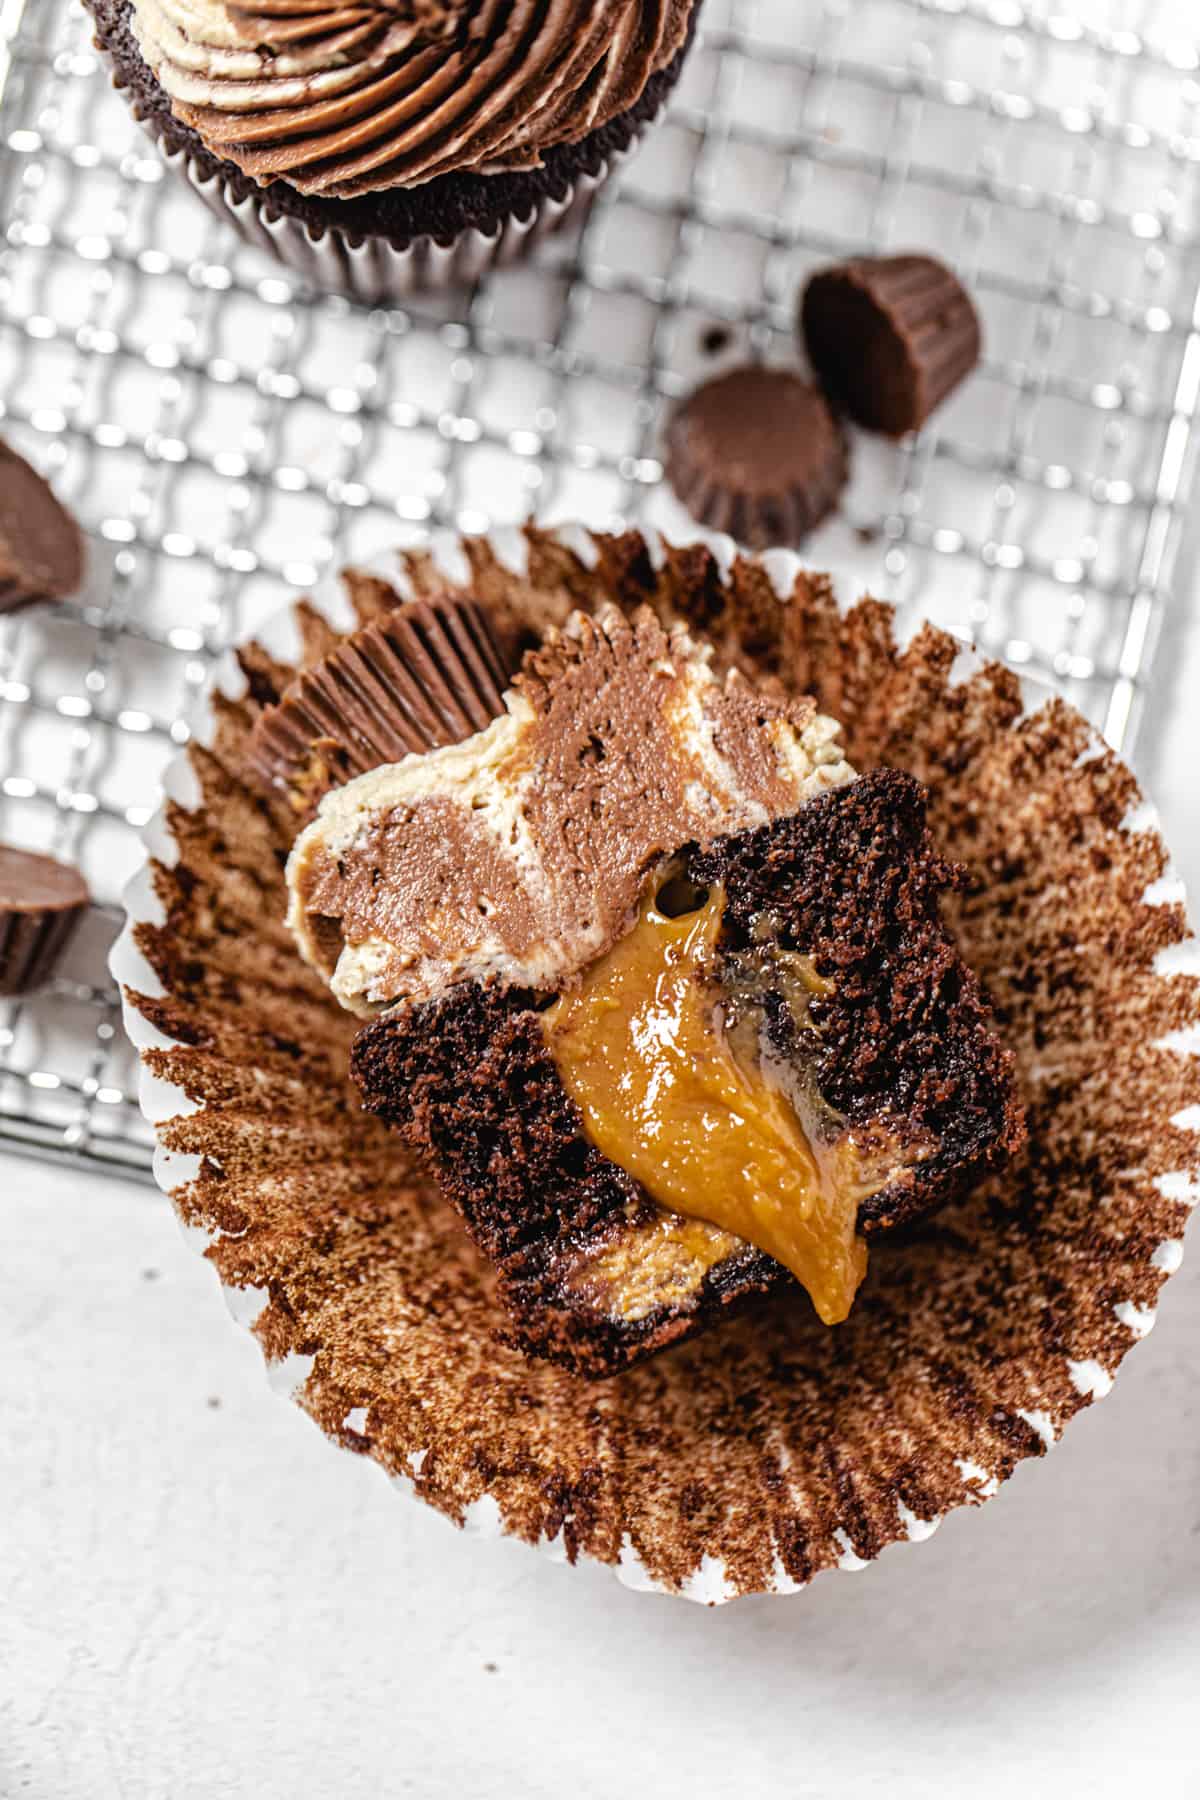 halved peanut butter filled cupcake on a cupcake liner with mini chocolate peanut butter cups around it